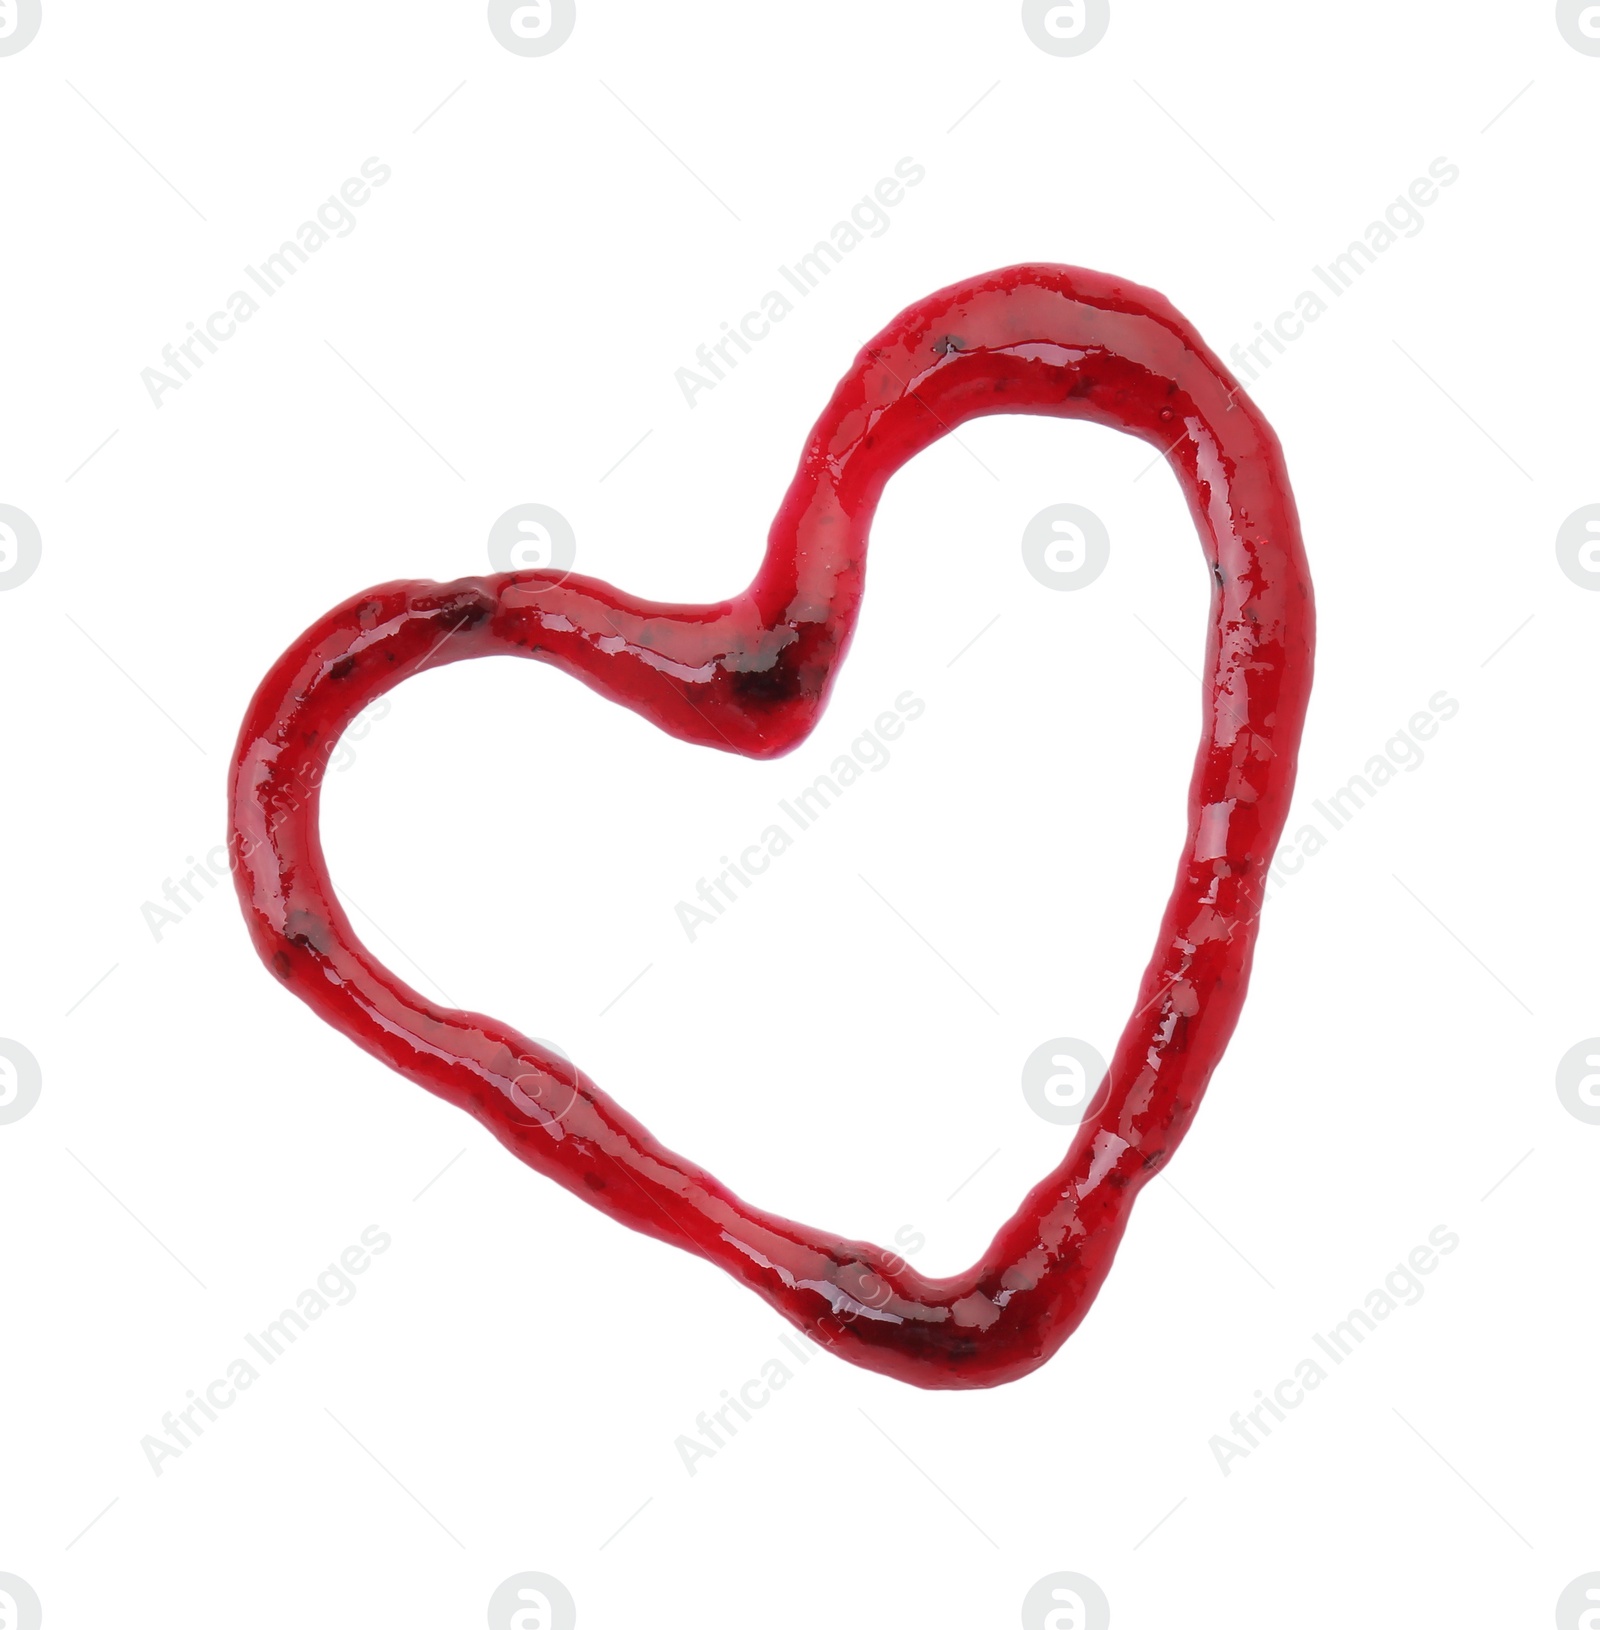 Photo of Heart made of tasty sweet jam isolated on white, top view